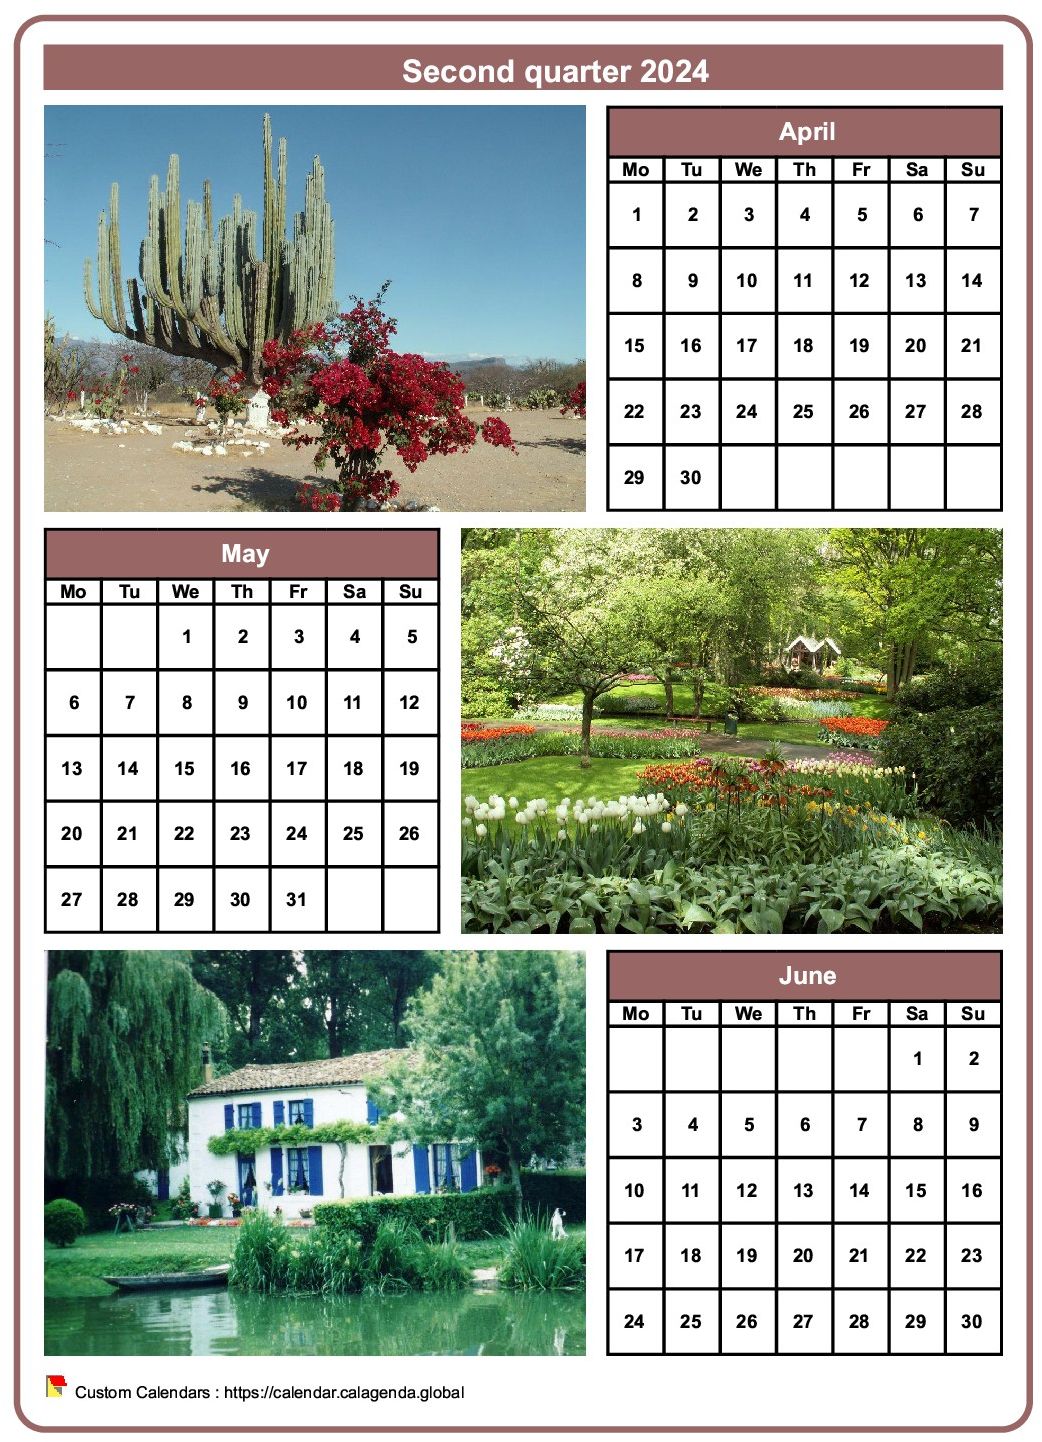 Calendar 2024 quarterly with a different photo every month